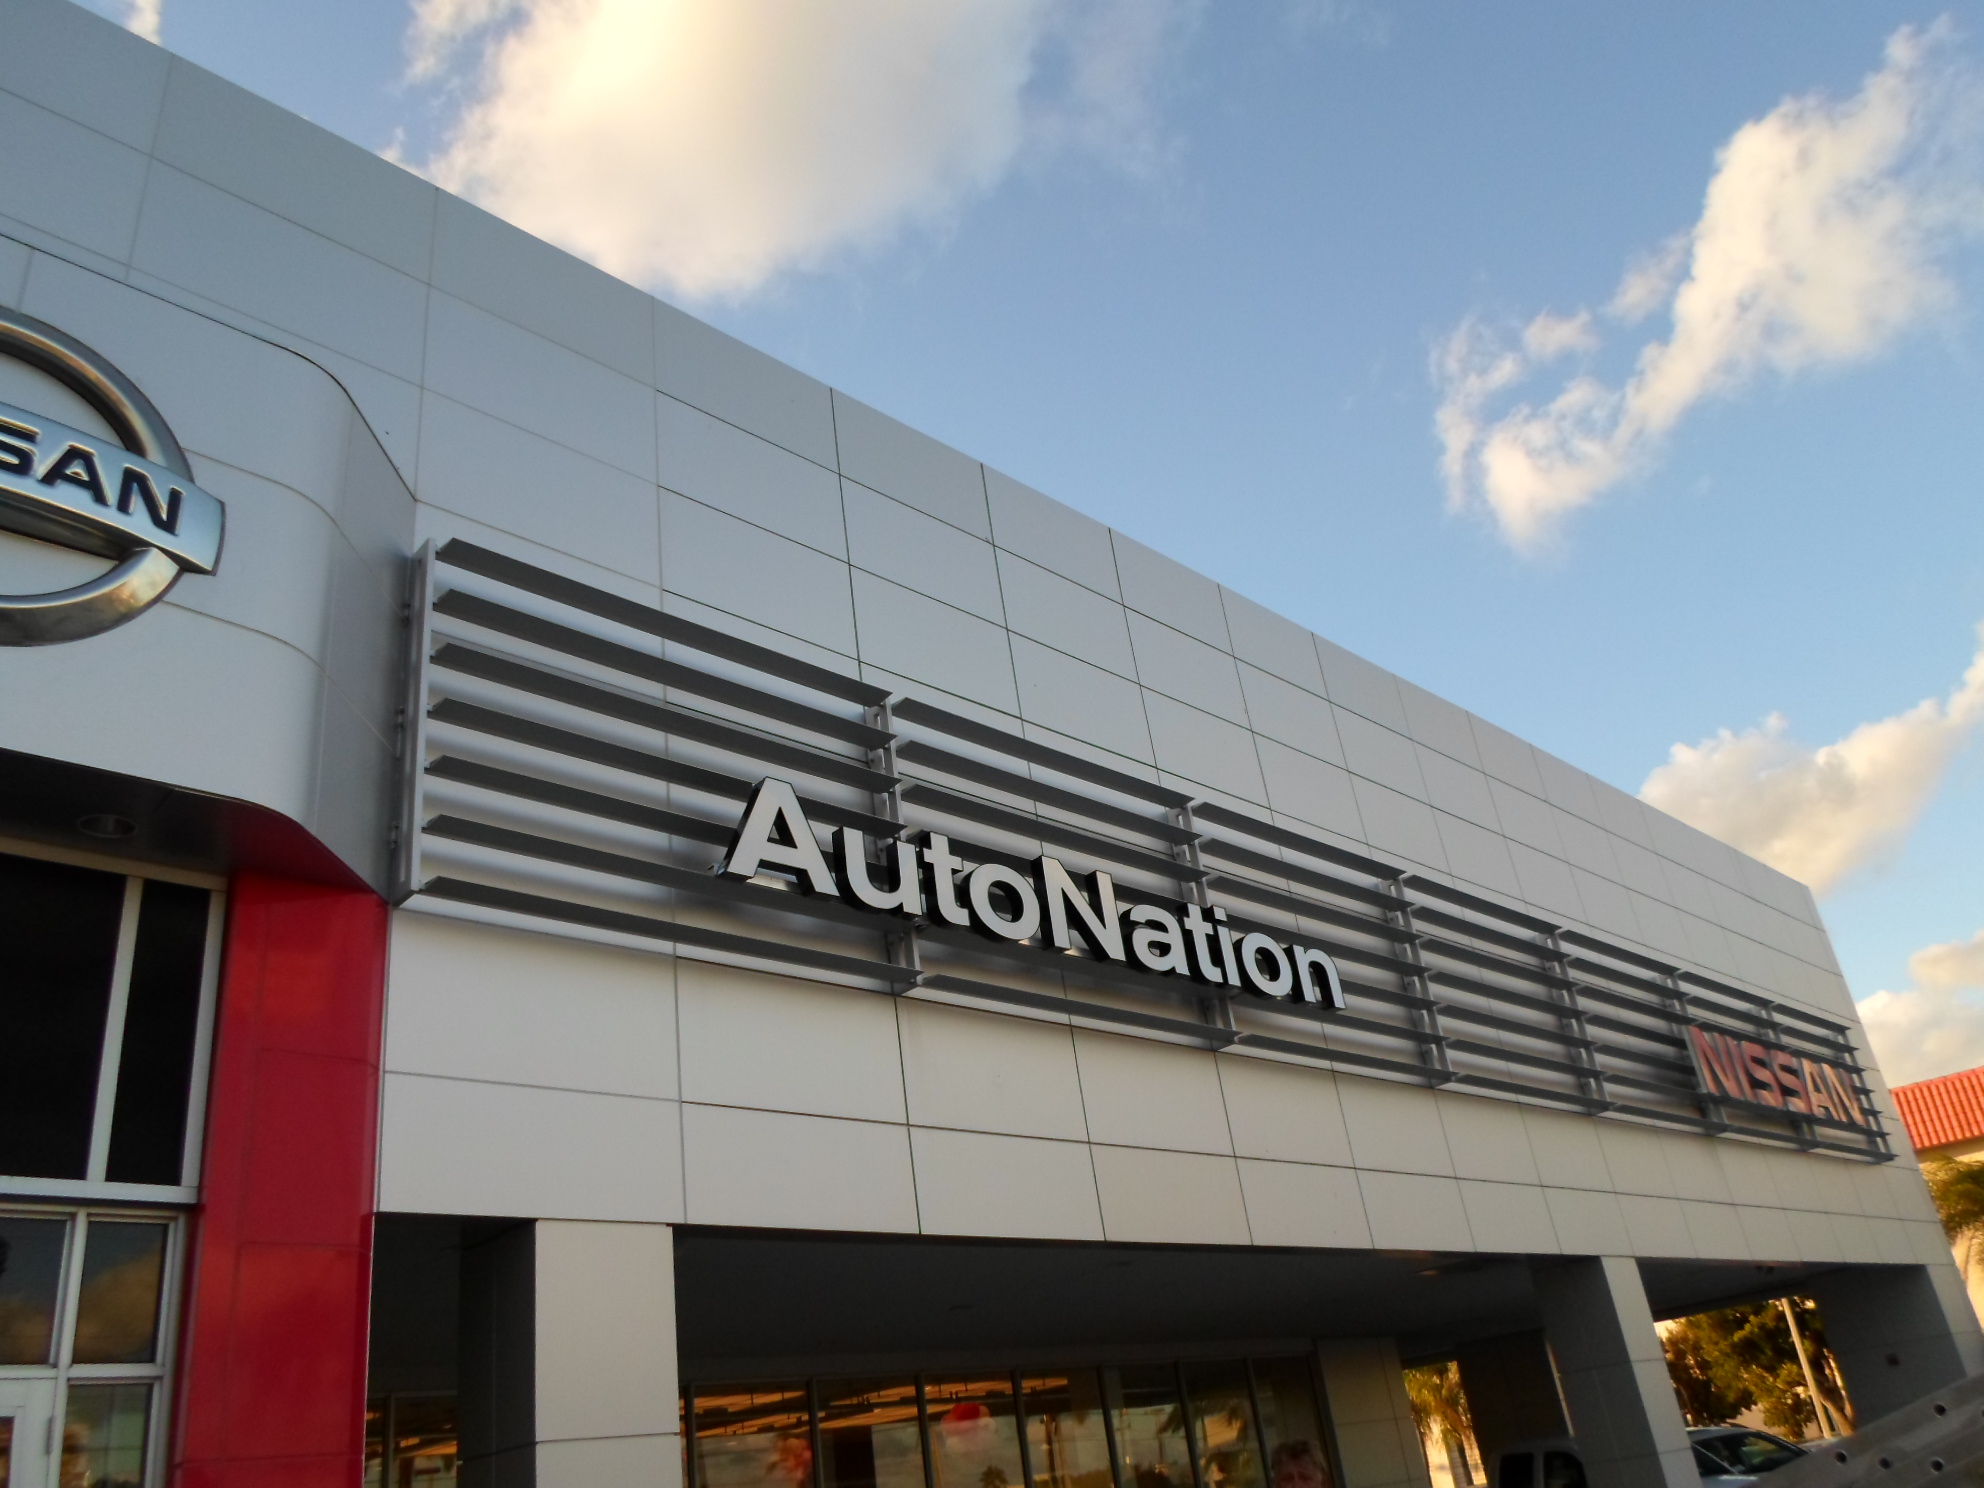 New car dealerships in Texas offer huge employment opportunities